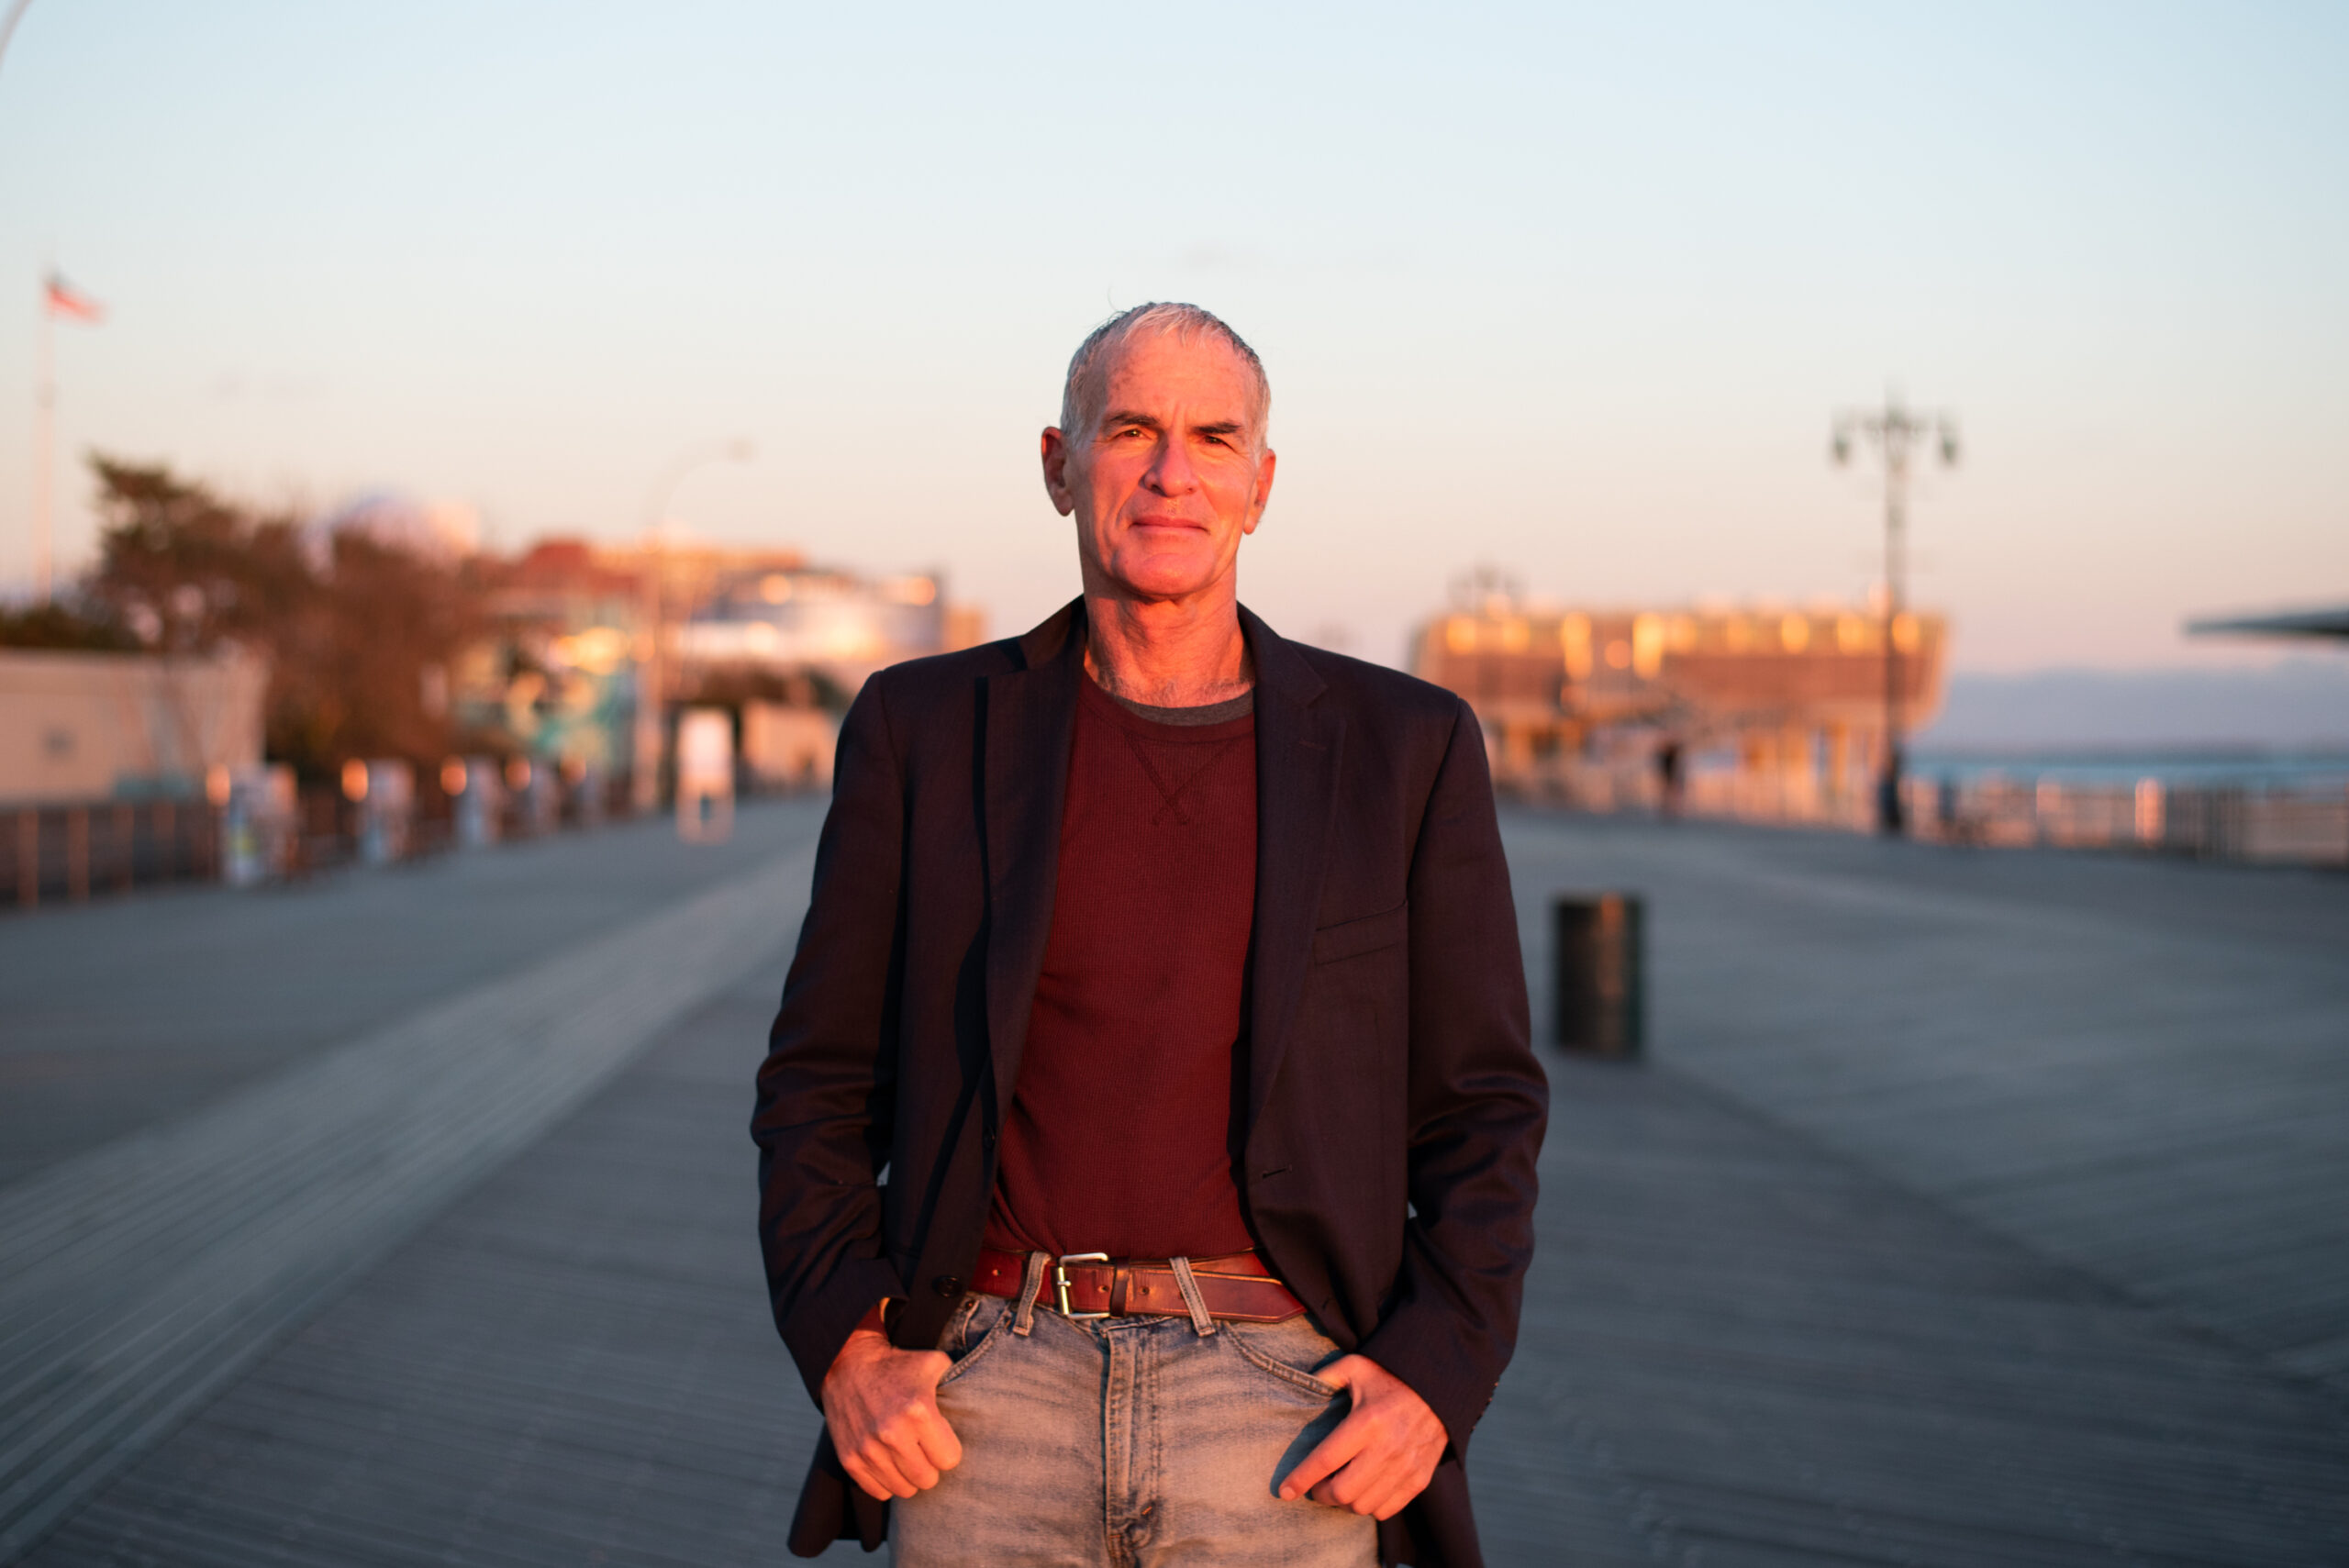 Finding Your Whiteness in a Time of Crisis: The Reeducation of Norman Finkelstein